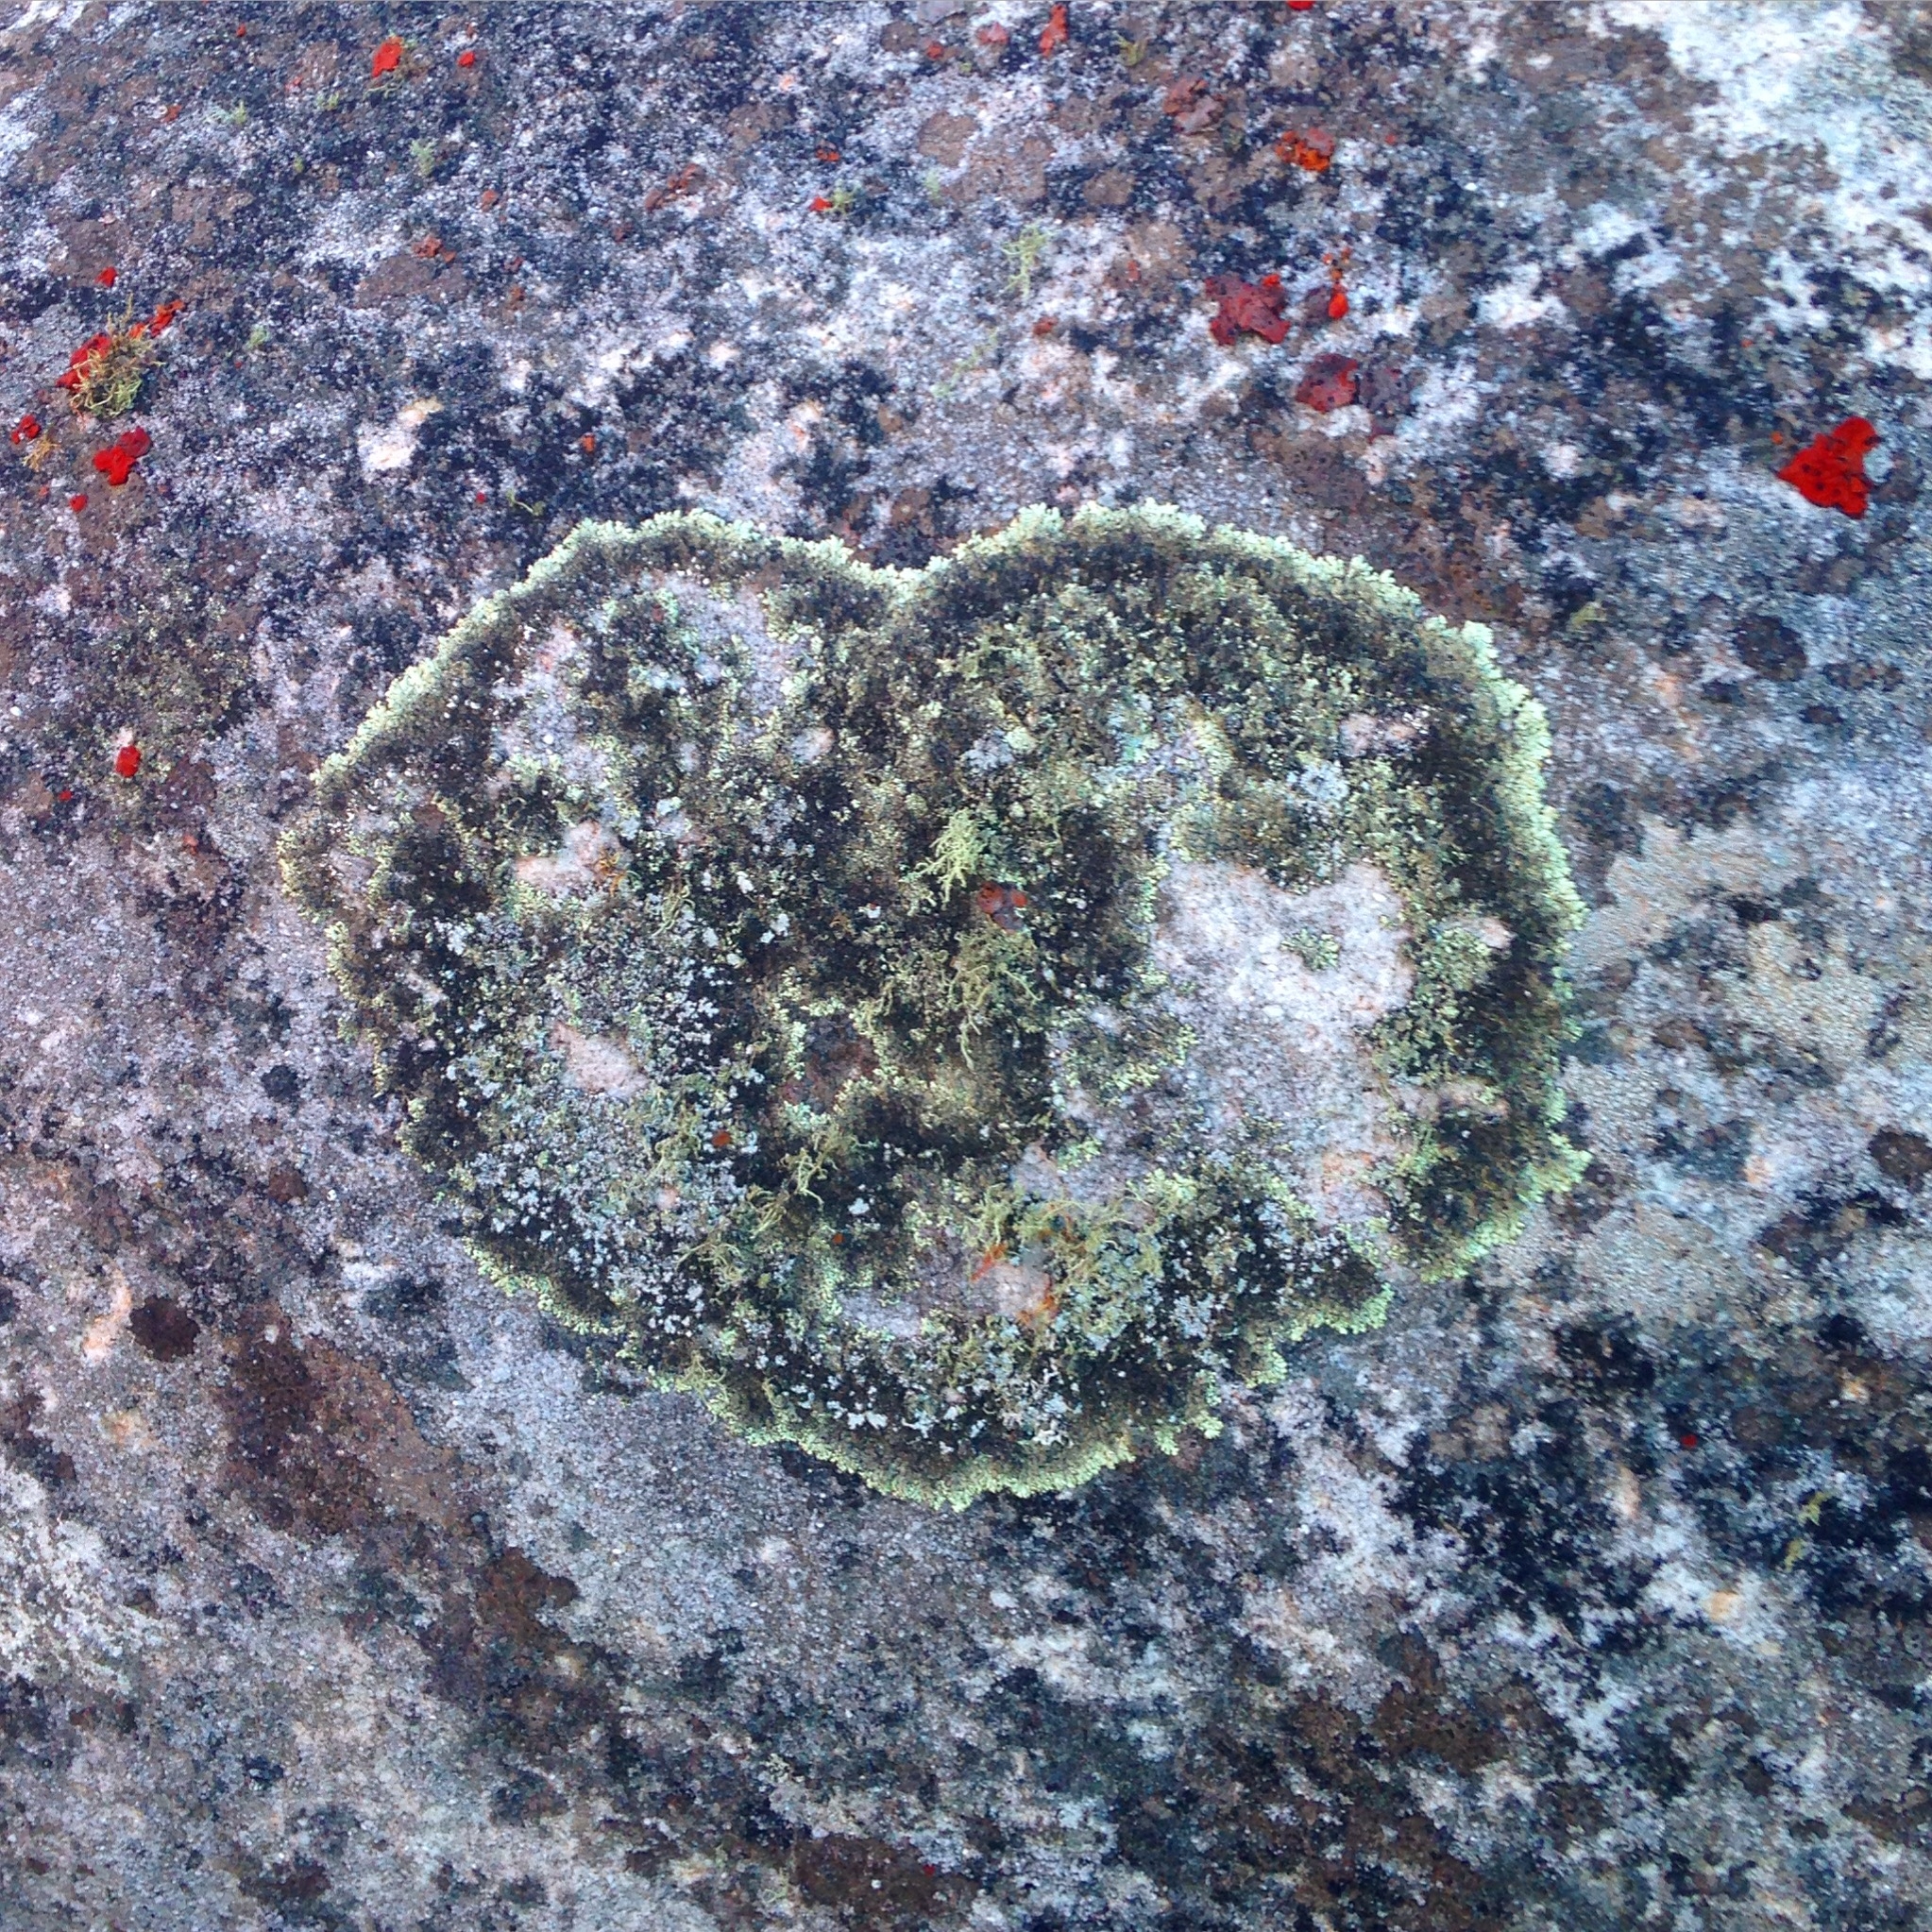 Heart made out of lichen on a rock